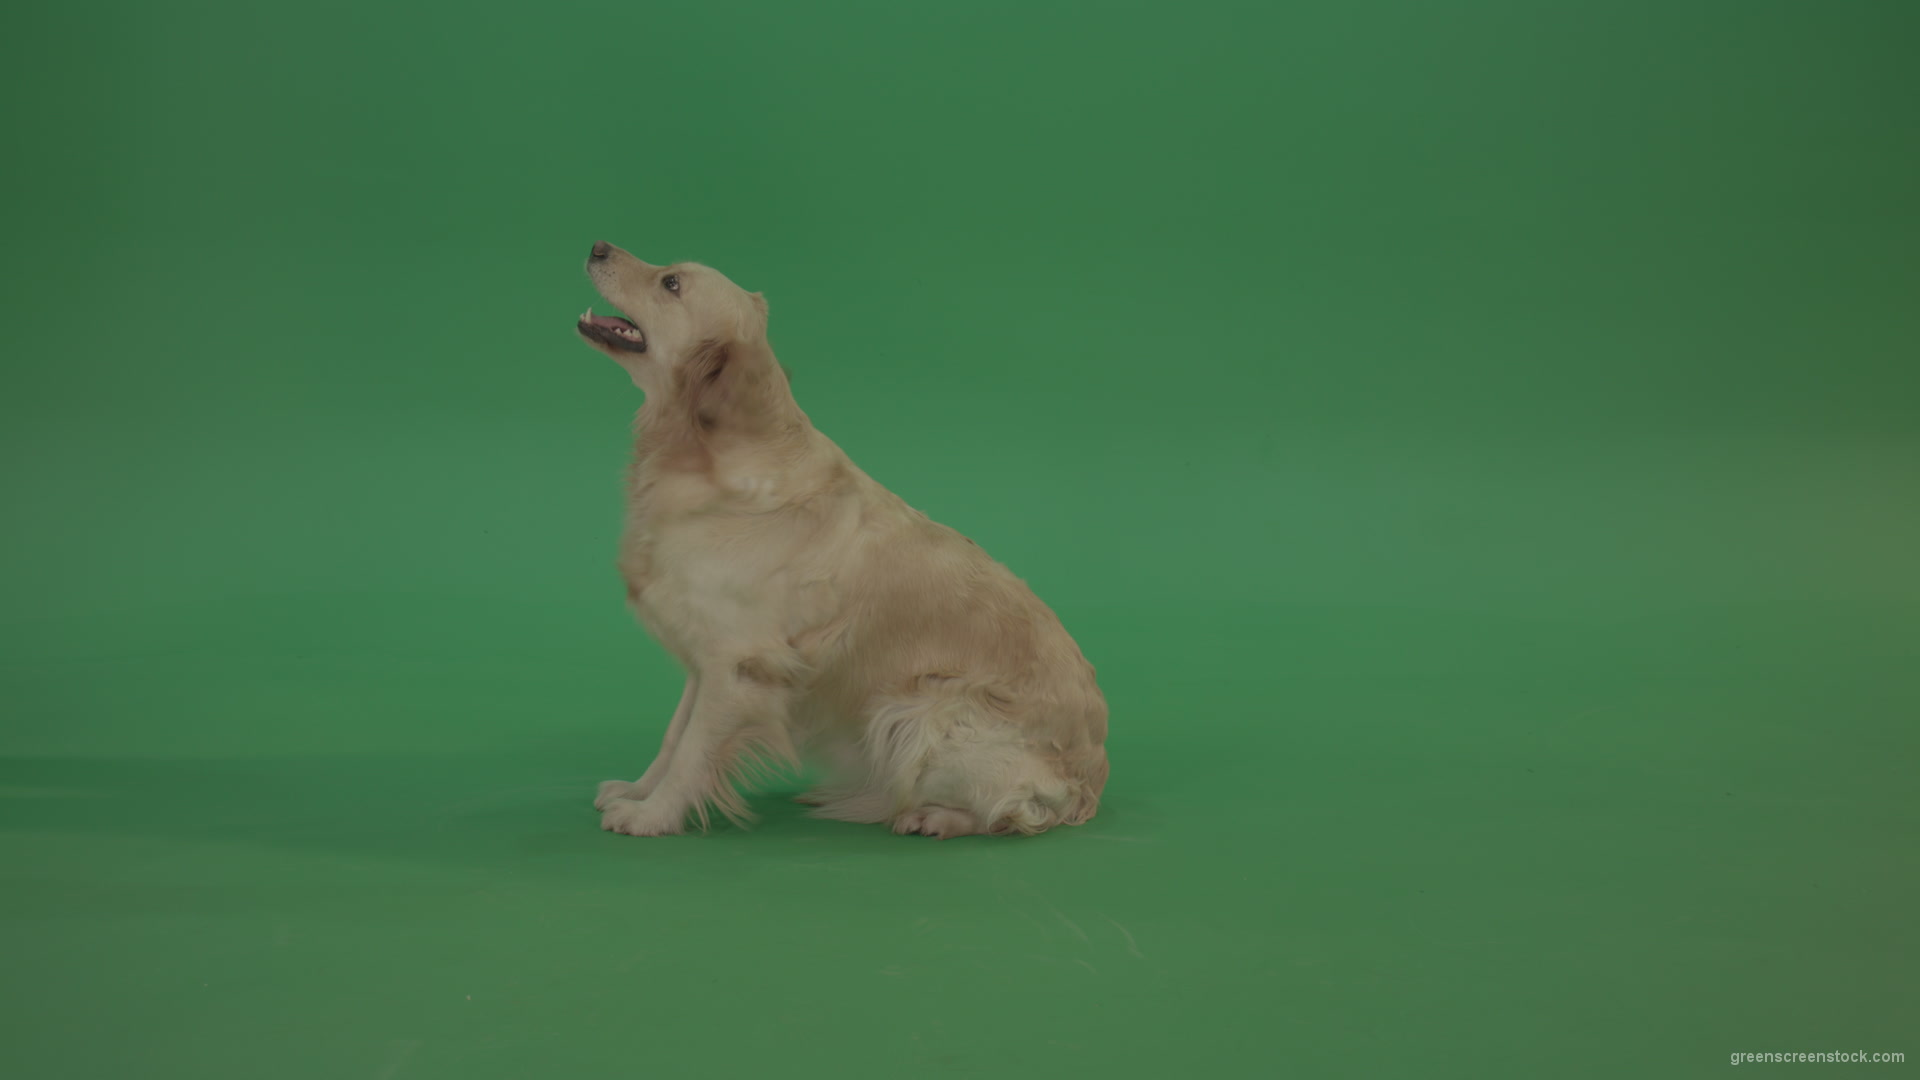 Golden-Retriever-green-screen-dog-in-side-view-barking-isolated-on-chromakey-green-background_007 Green Screen Stock